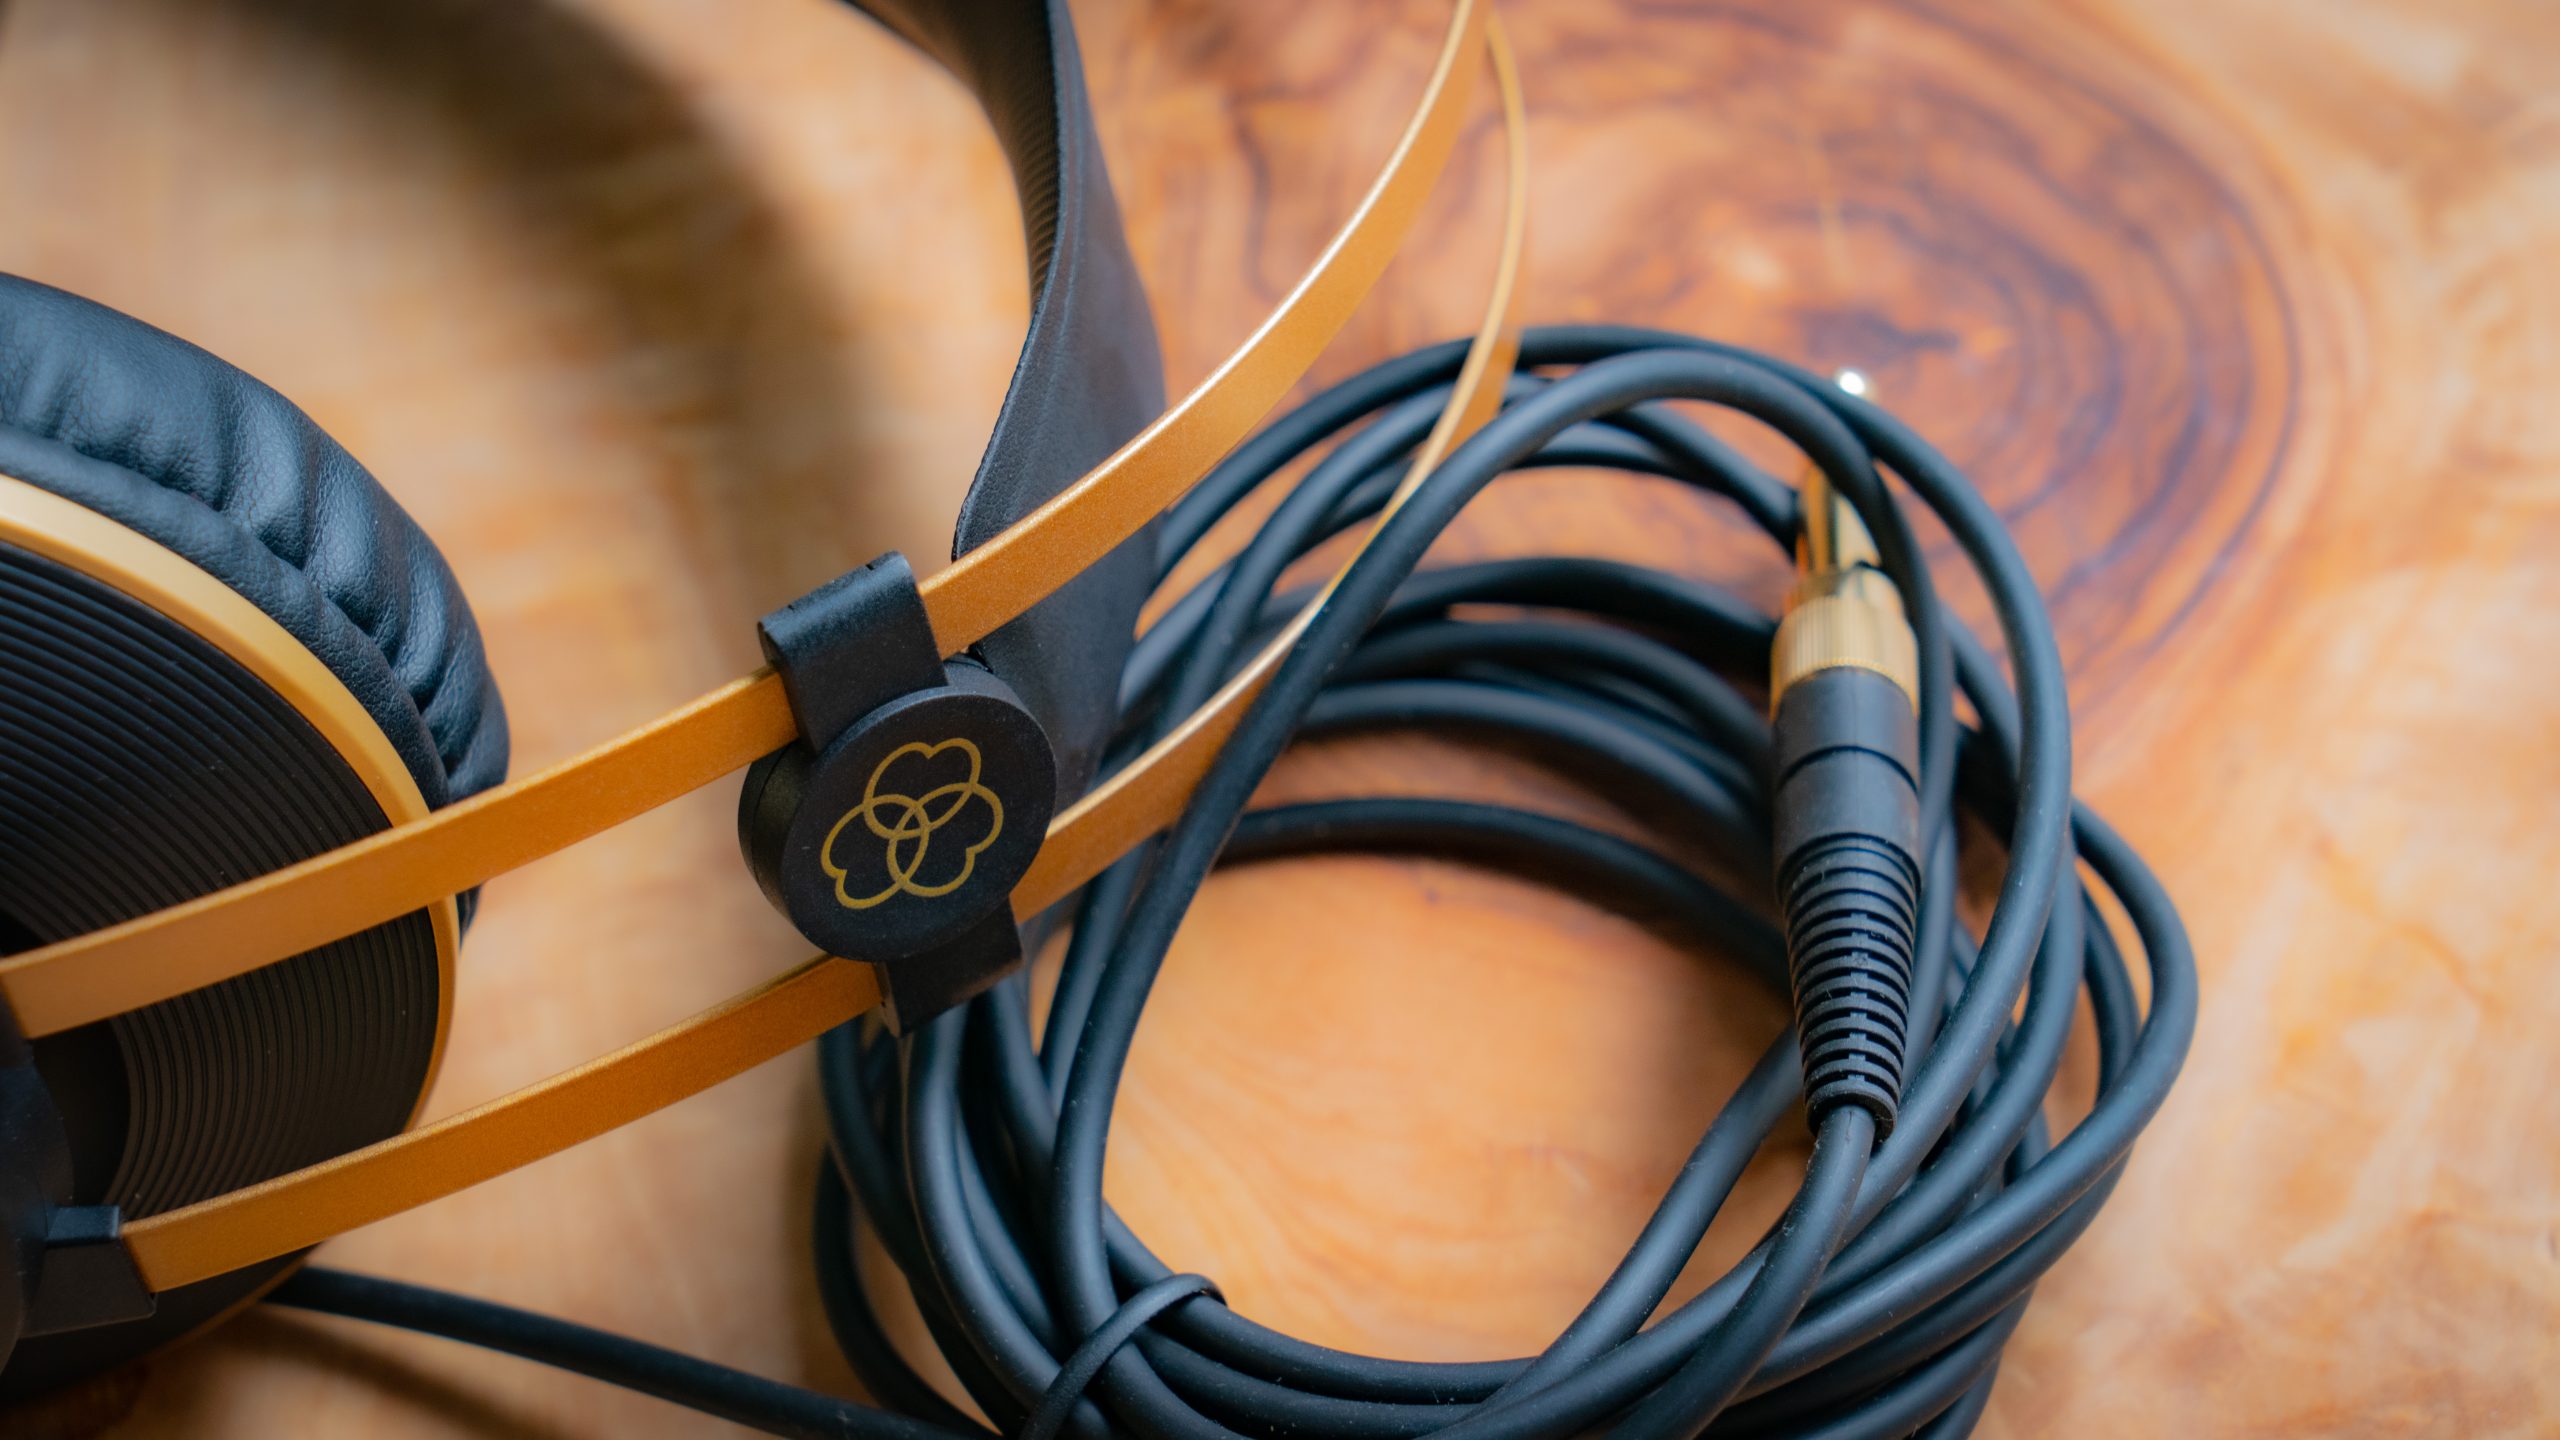 A photo of the AKG K92's cable, wound and resting on a table.